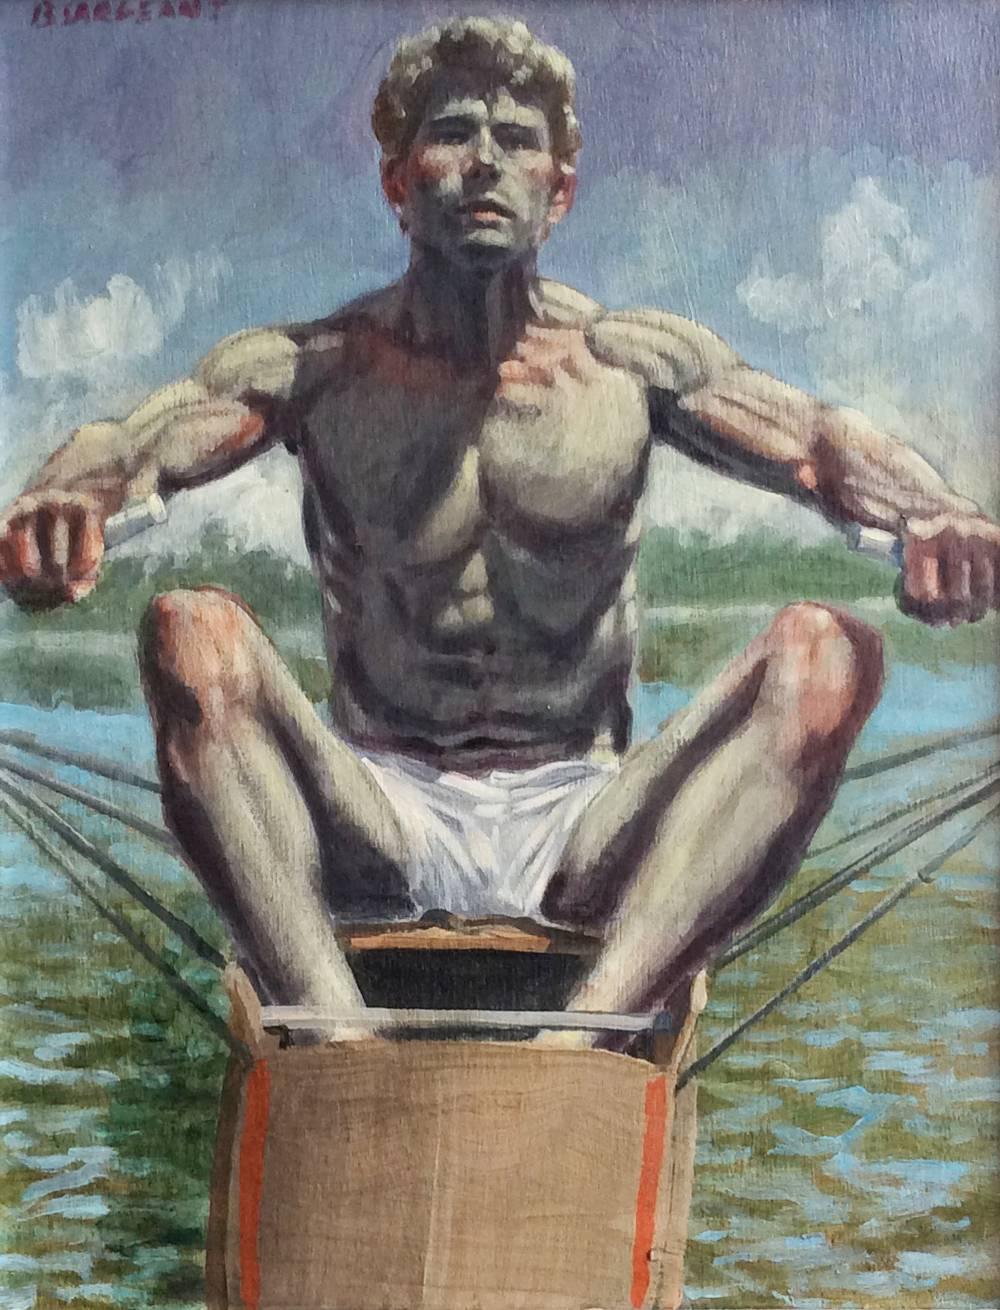 Mark Beard Figurative Painting - Justin Rowing (Figurative Nautical Style Oil Painting of Athletic Male Figure)